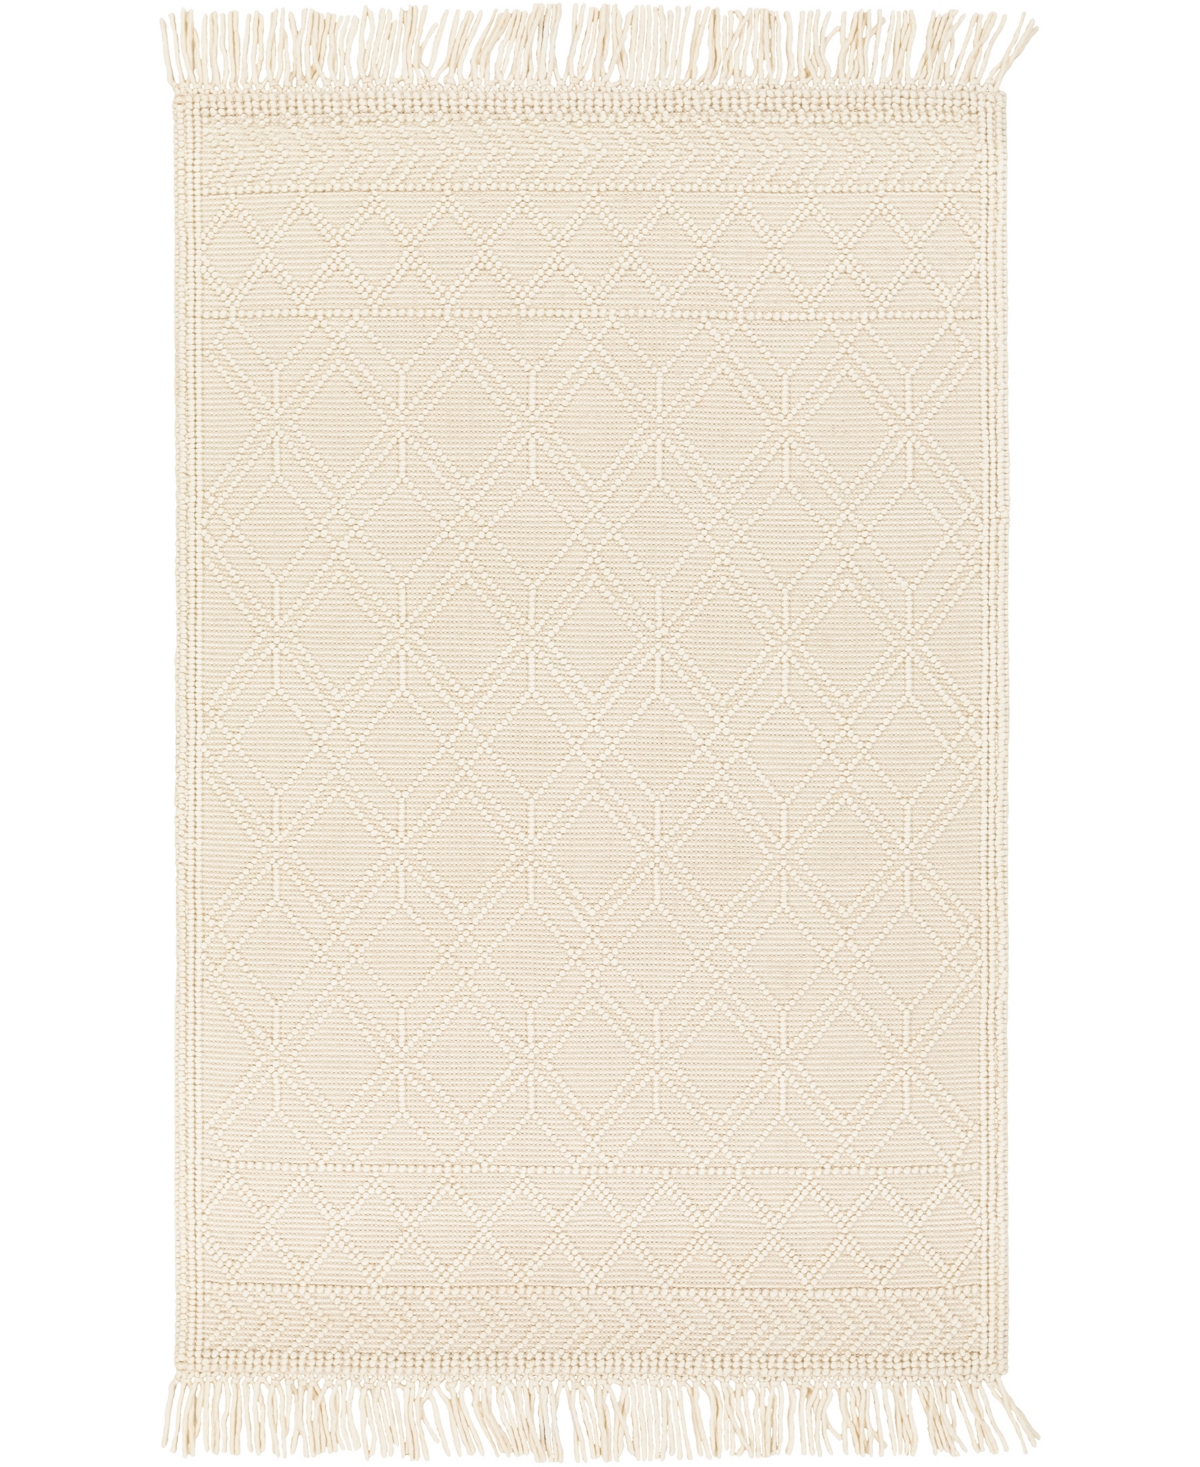 Surya Casa DeCampo CDC2302 2'3in x 3'9in Area Rug - Beige